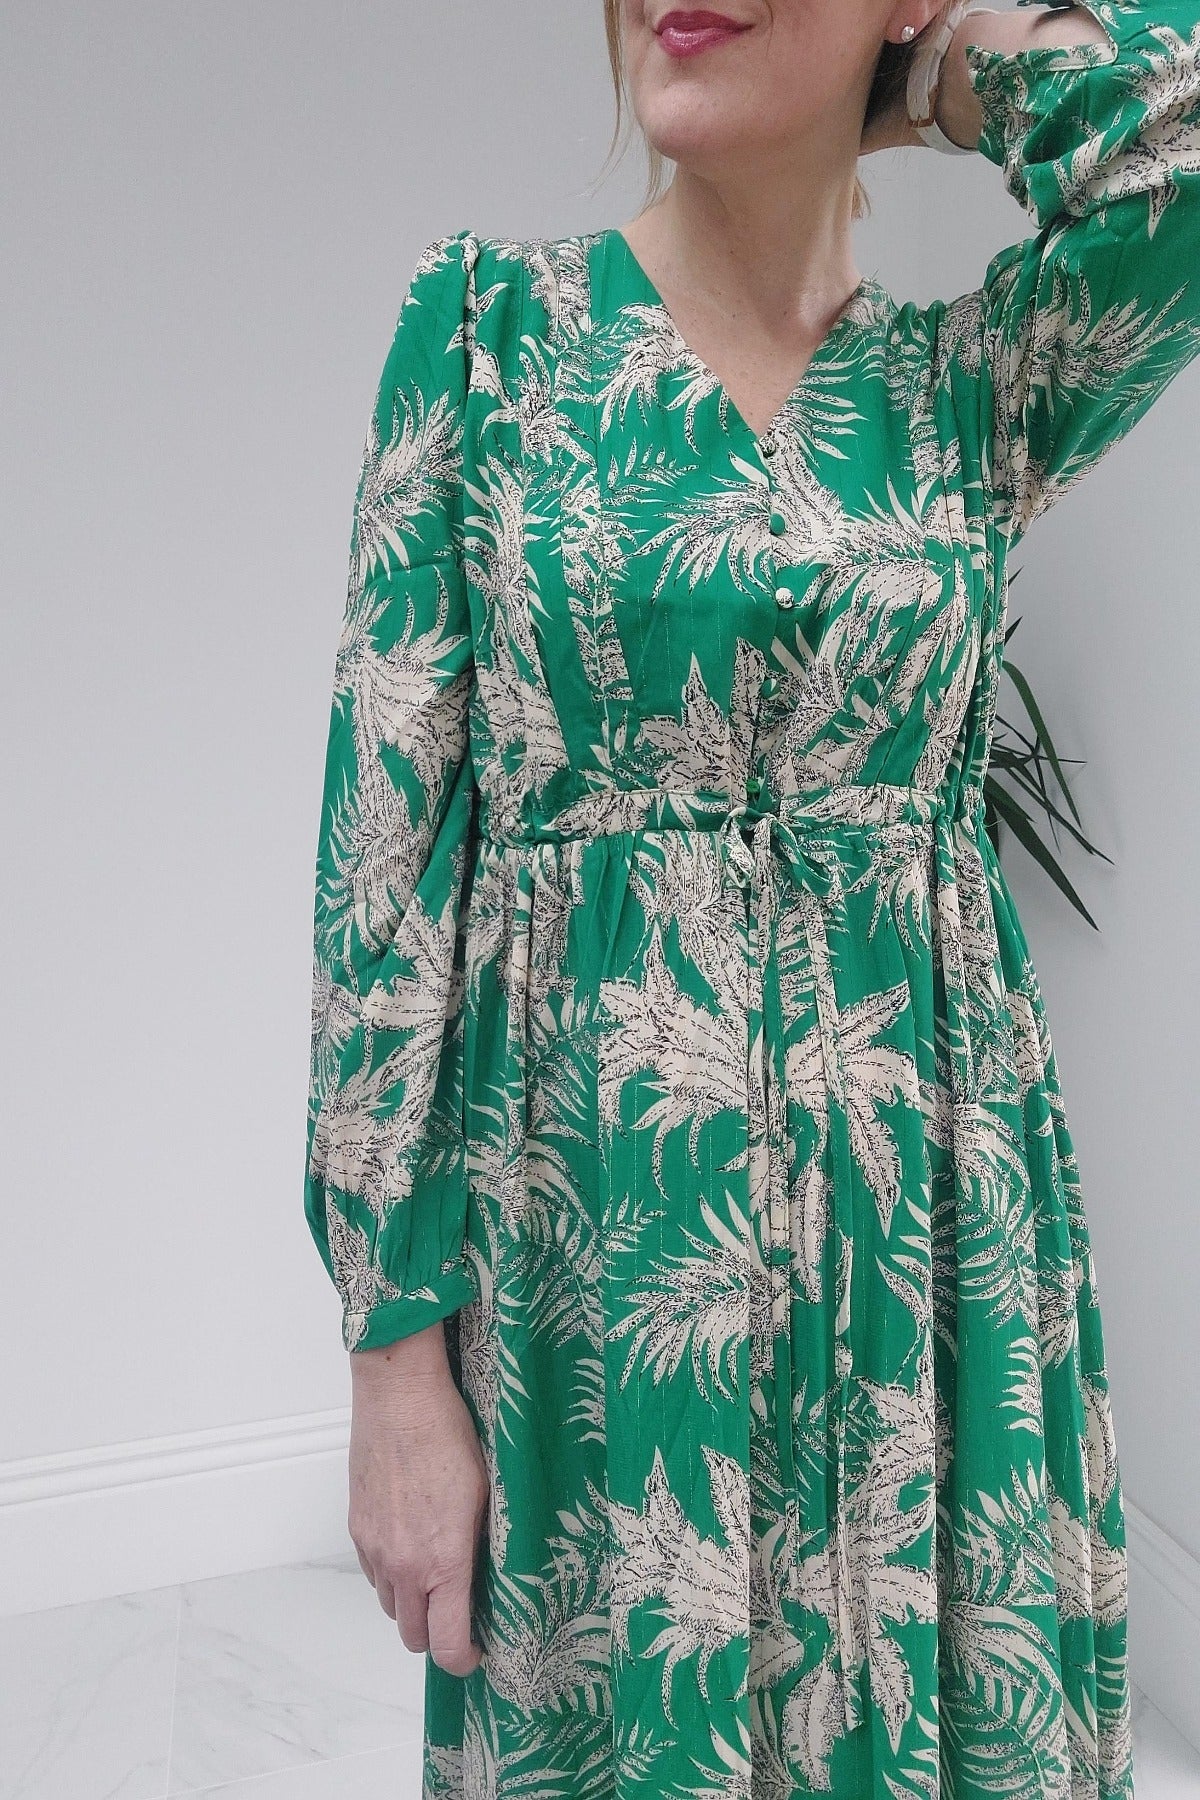 Tropical Palm Leaf Print Dress In Green With Gold Thread - Filli London